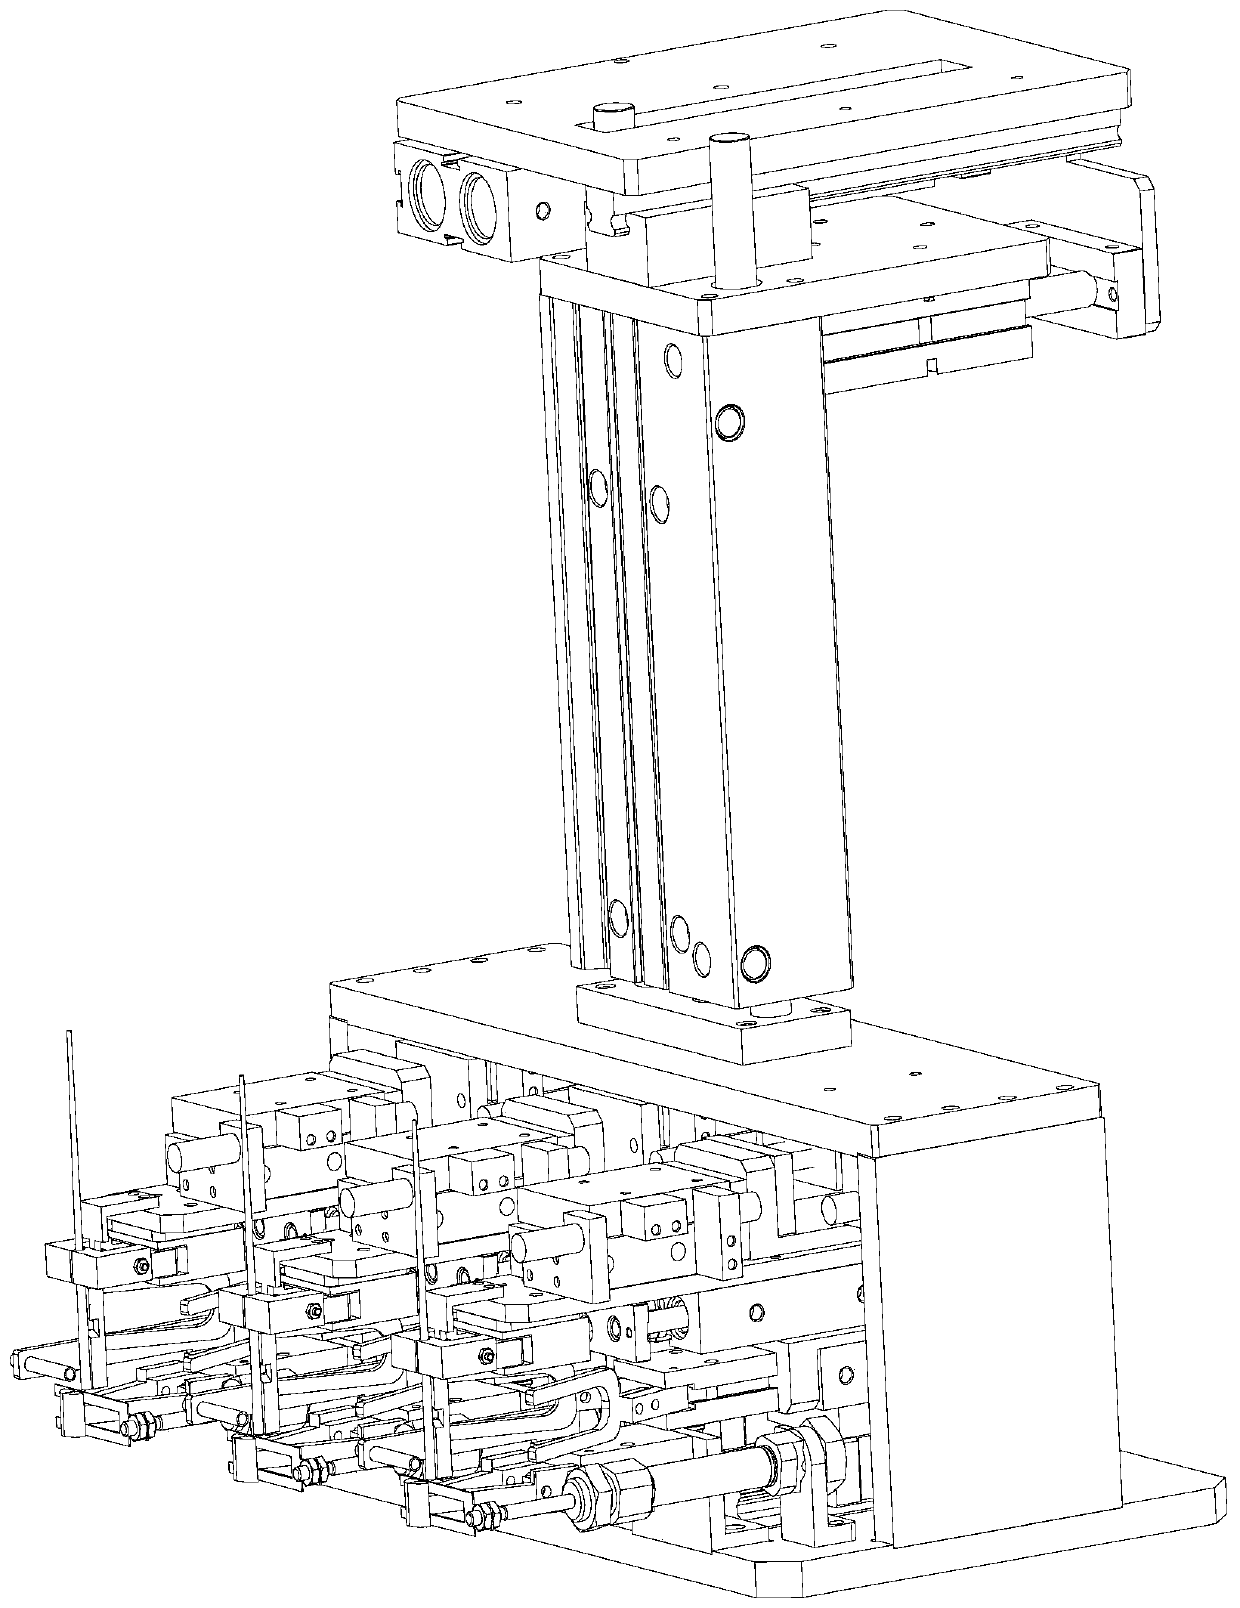 A multi-plant synchronous vegetable seedling grafting device